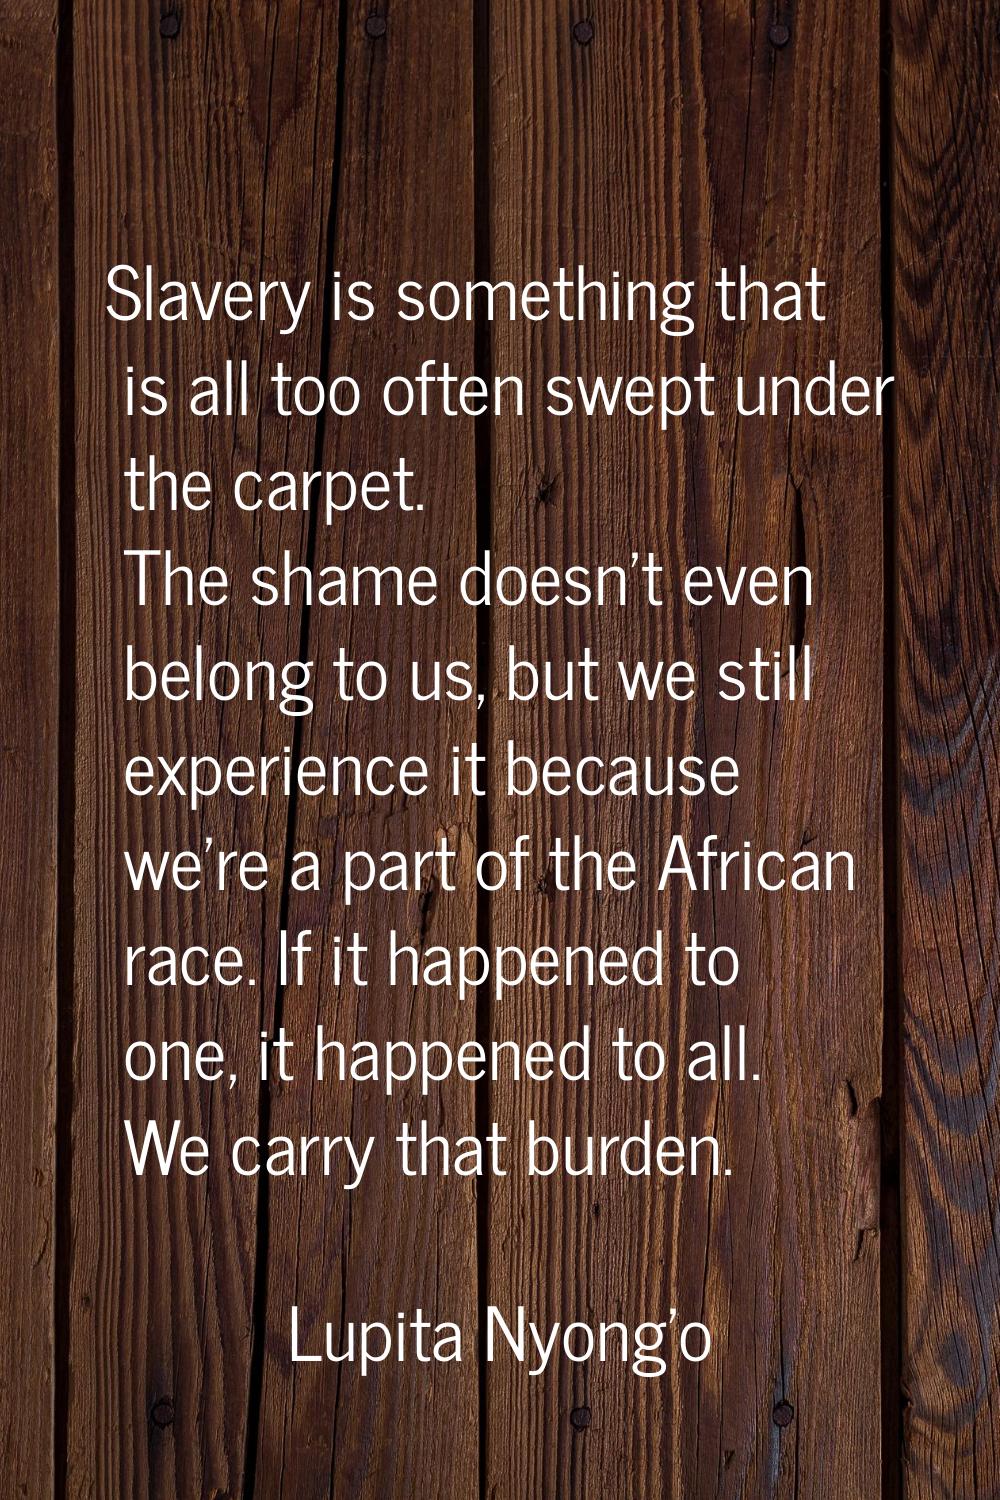 Slavery is something that is all too often swept under the carpet. The shame doesn't even belong to